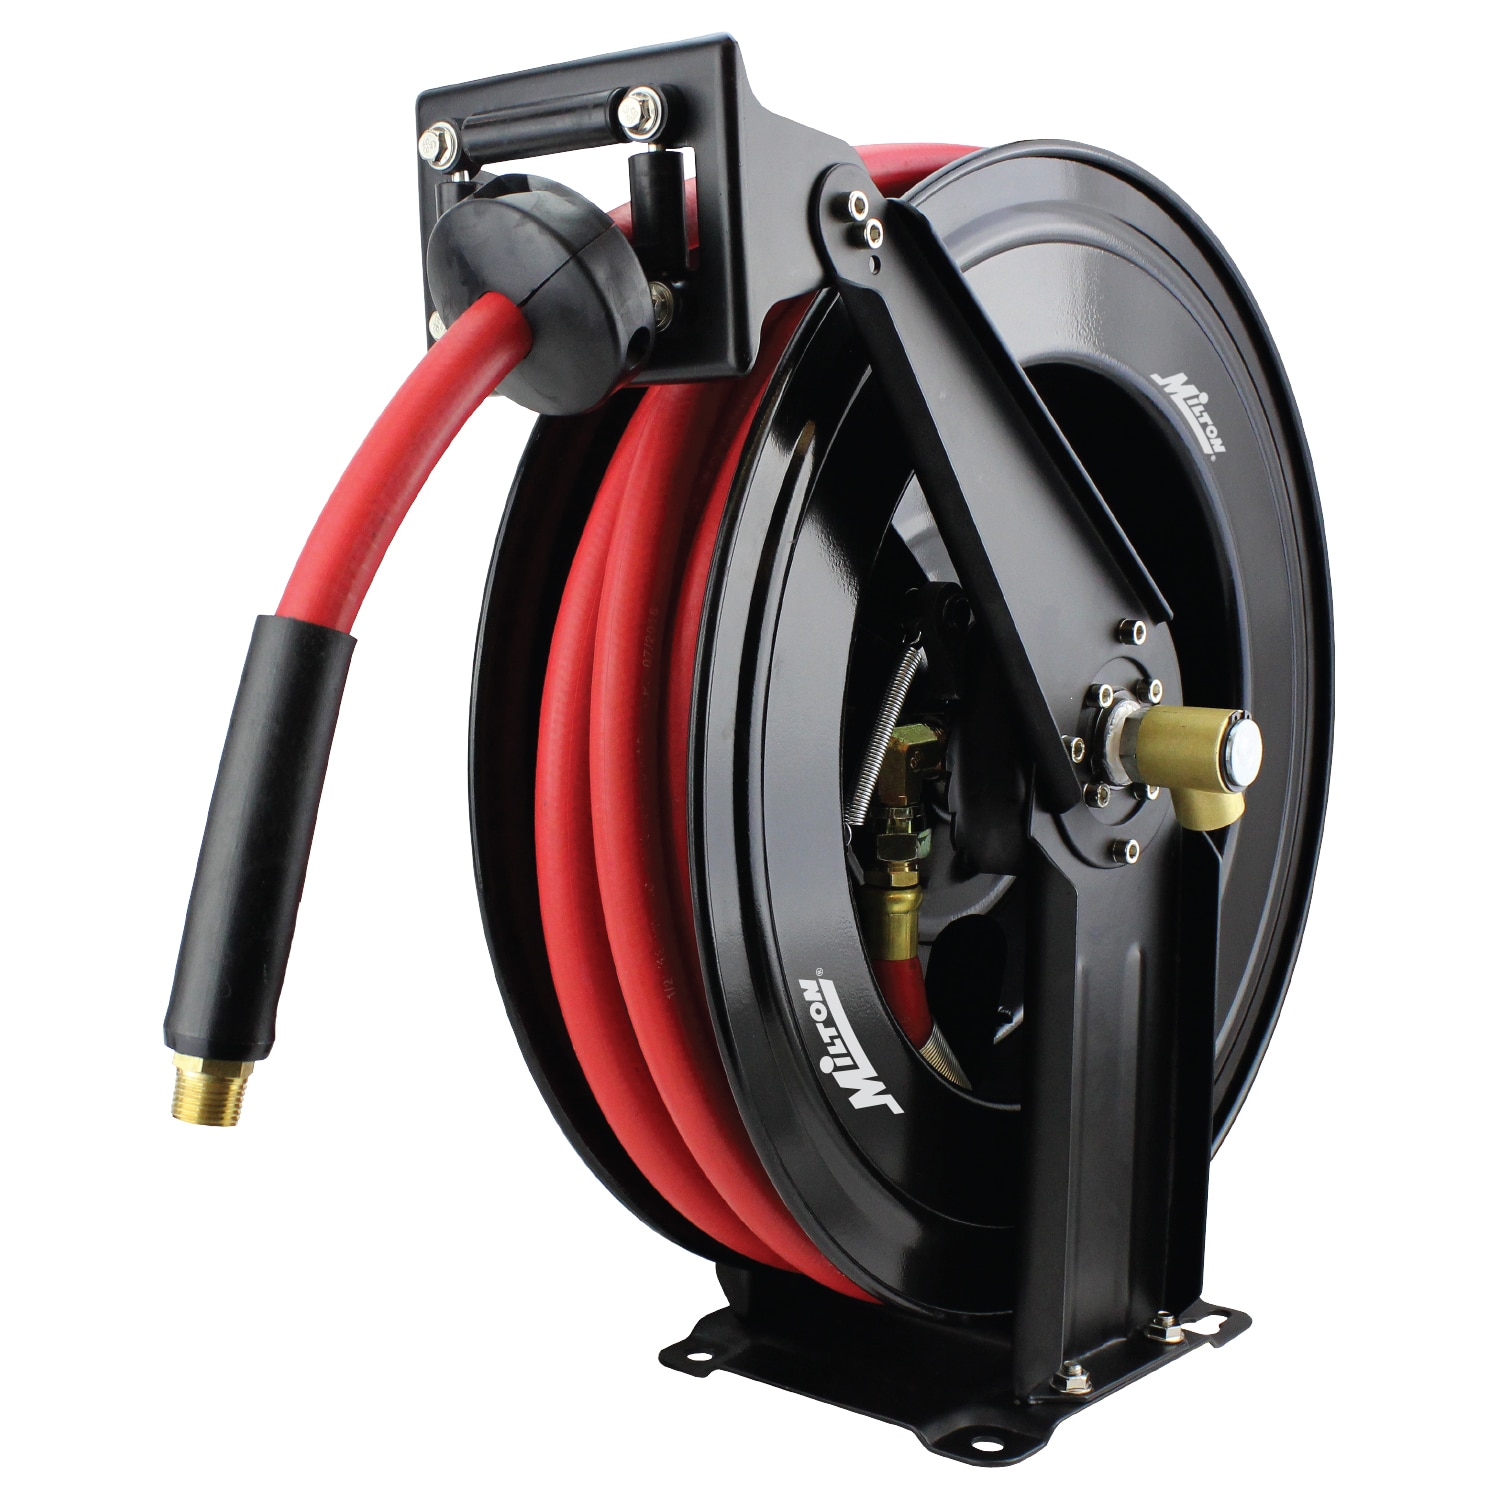 Koval Inc. 100 ft. long 3/8 Wall Mount Auto Retractable Air Hose Reel  (100FT, Red/Black)